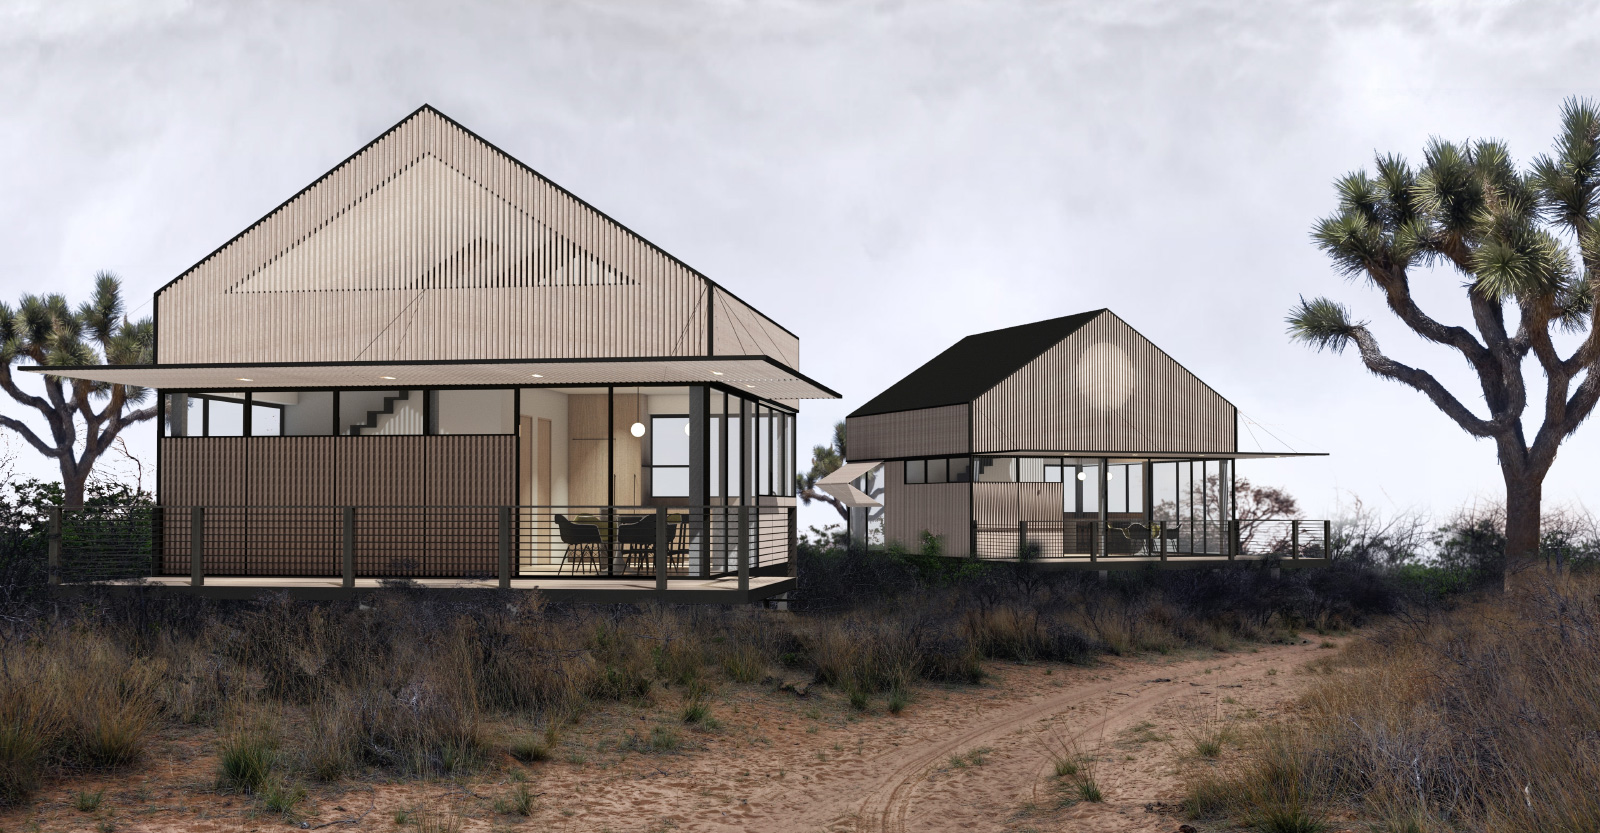 Rendering of two Accessory Dwelling Unit prototypes